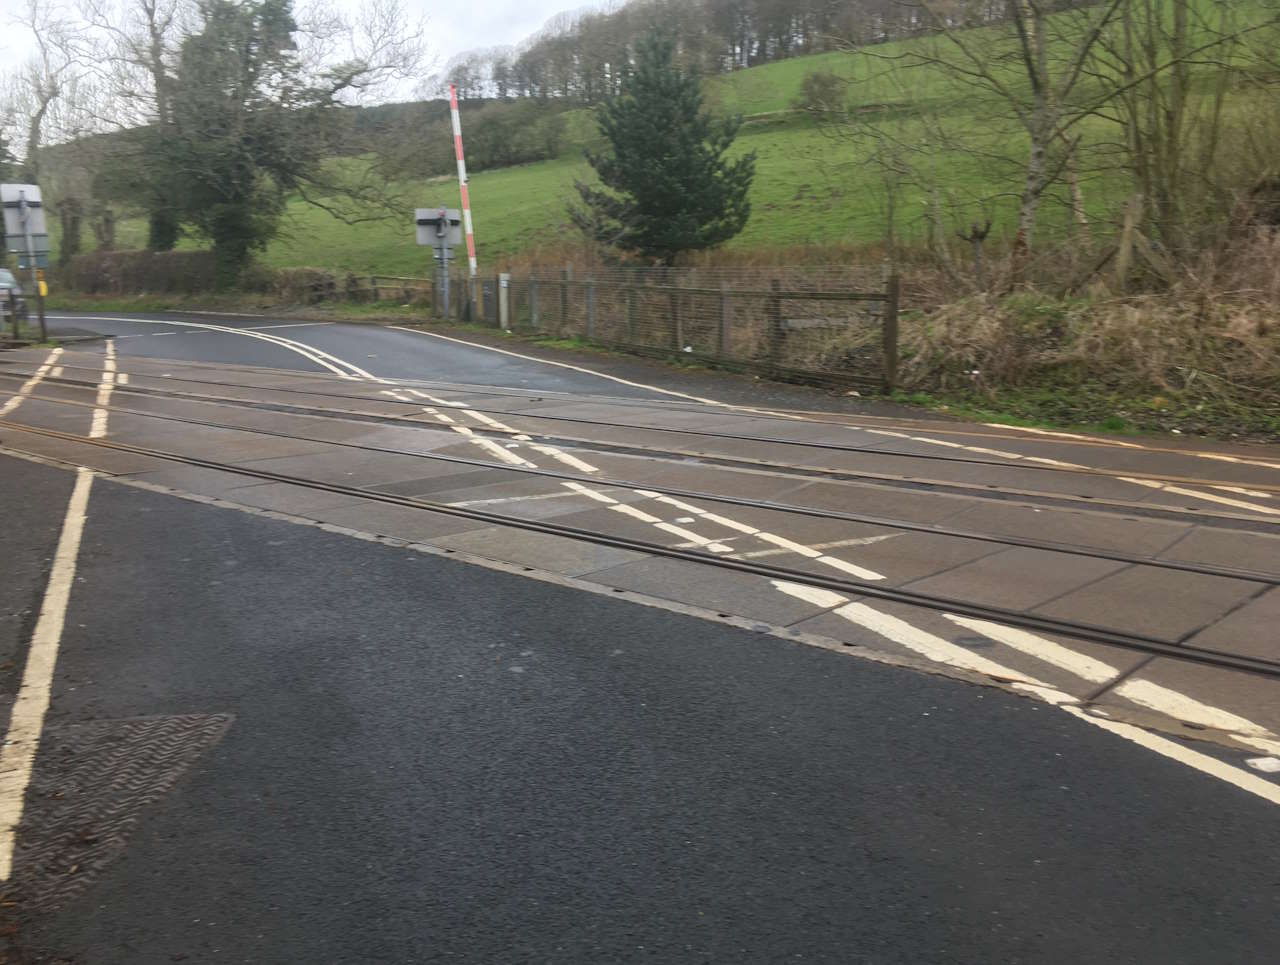 Newcastle to Carlisle train services to be affected by level crossing upgrades - RailAdvent 